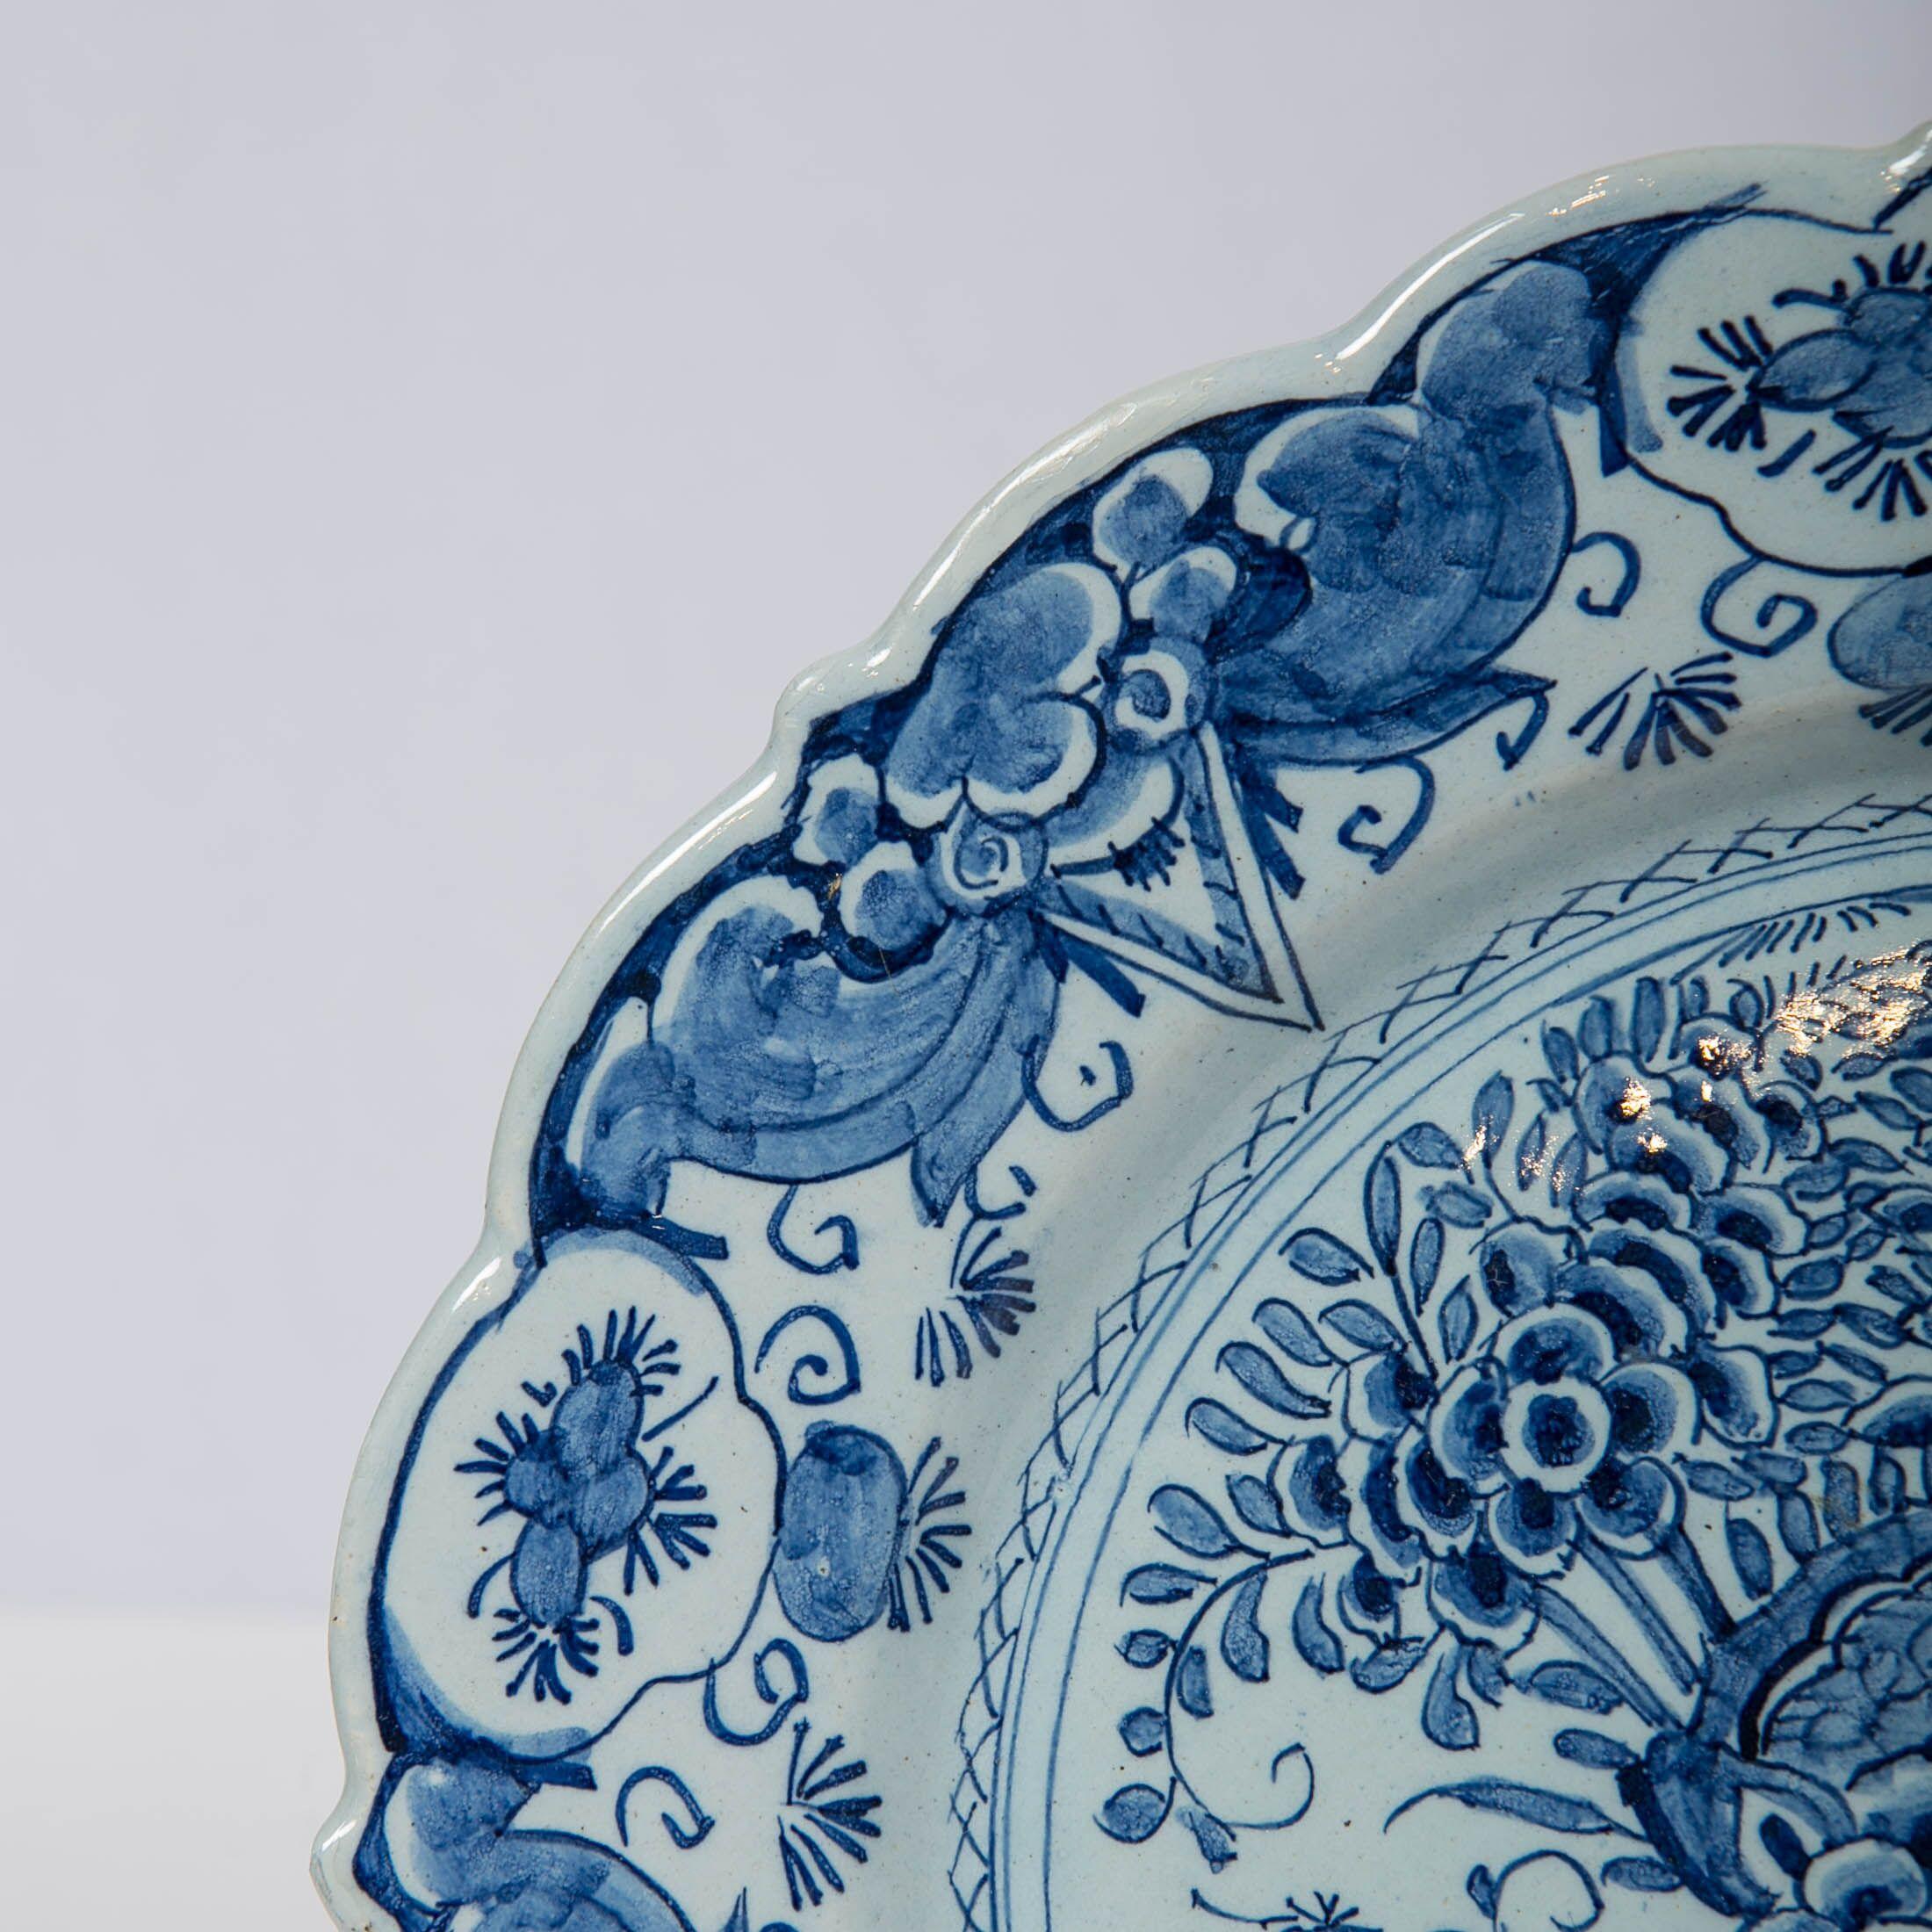 Dutch Delft Blue and White Charger Hand Painted Made by De Bijl 'The Axe', circa 1770